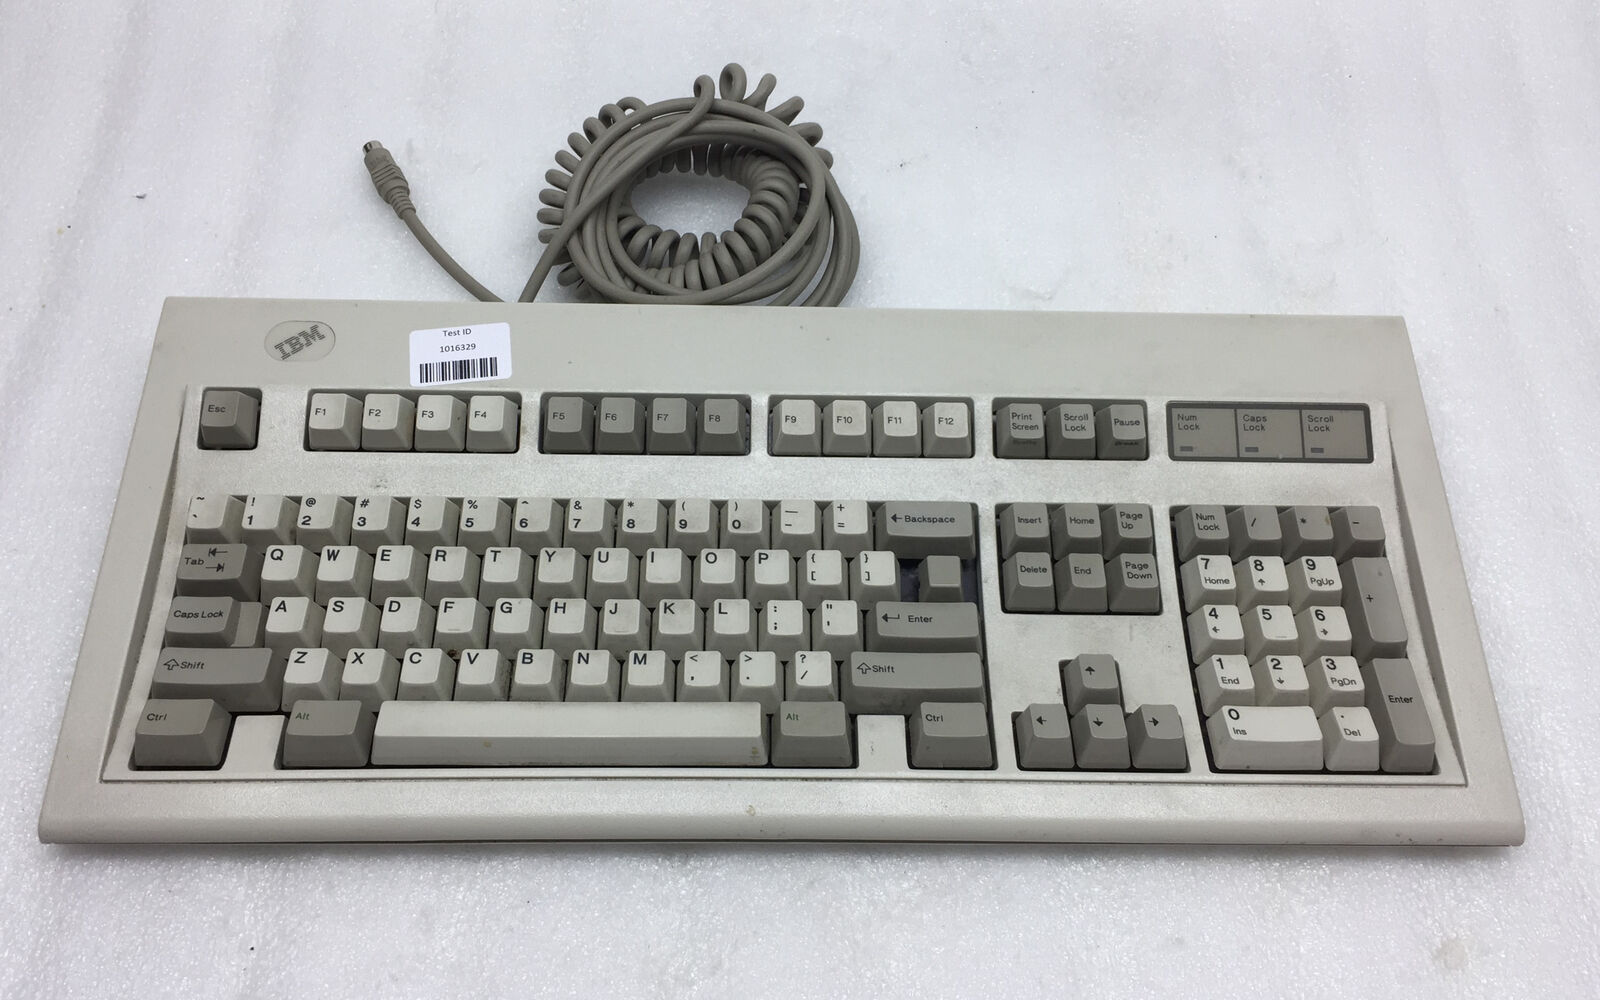 Vintage 1984 IBM Keyboard Model M w Cable For Part/Repair Untested par t#1391401